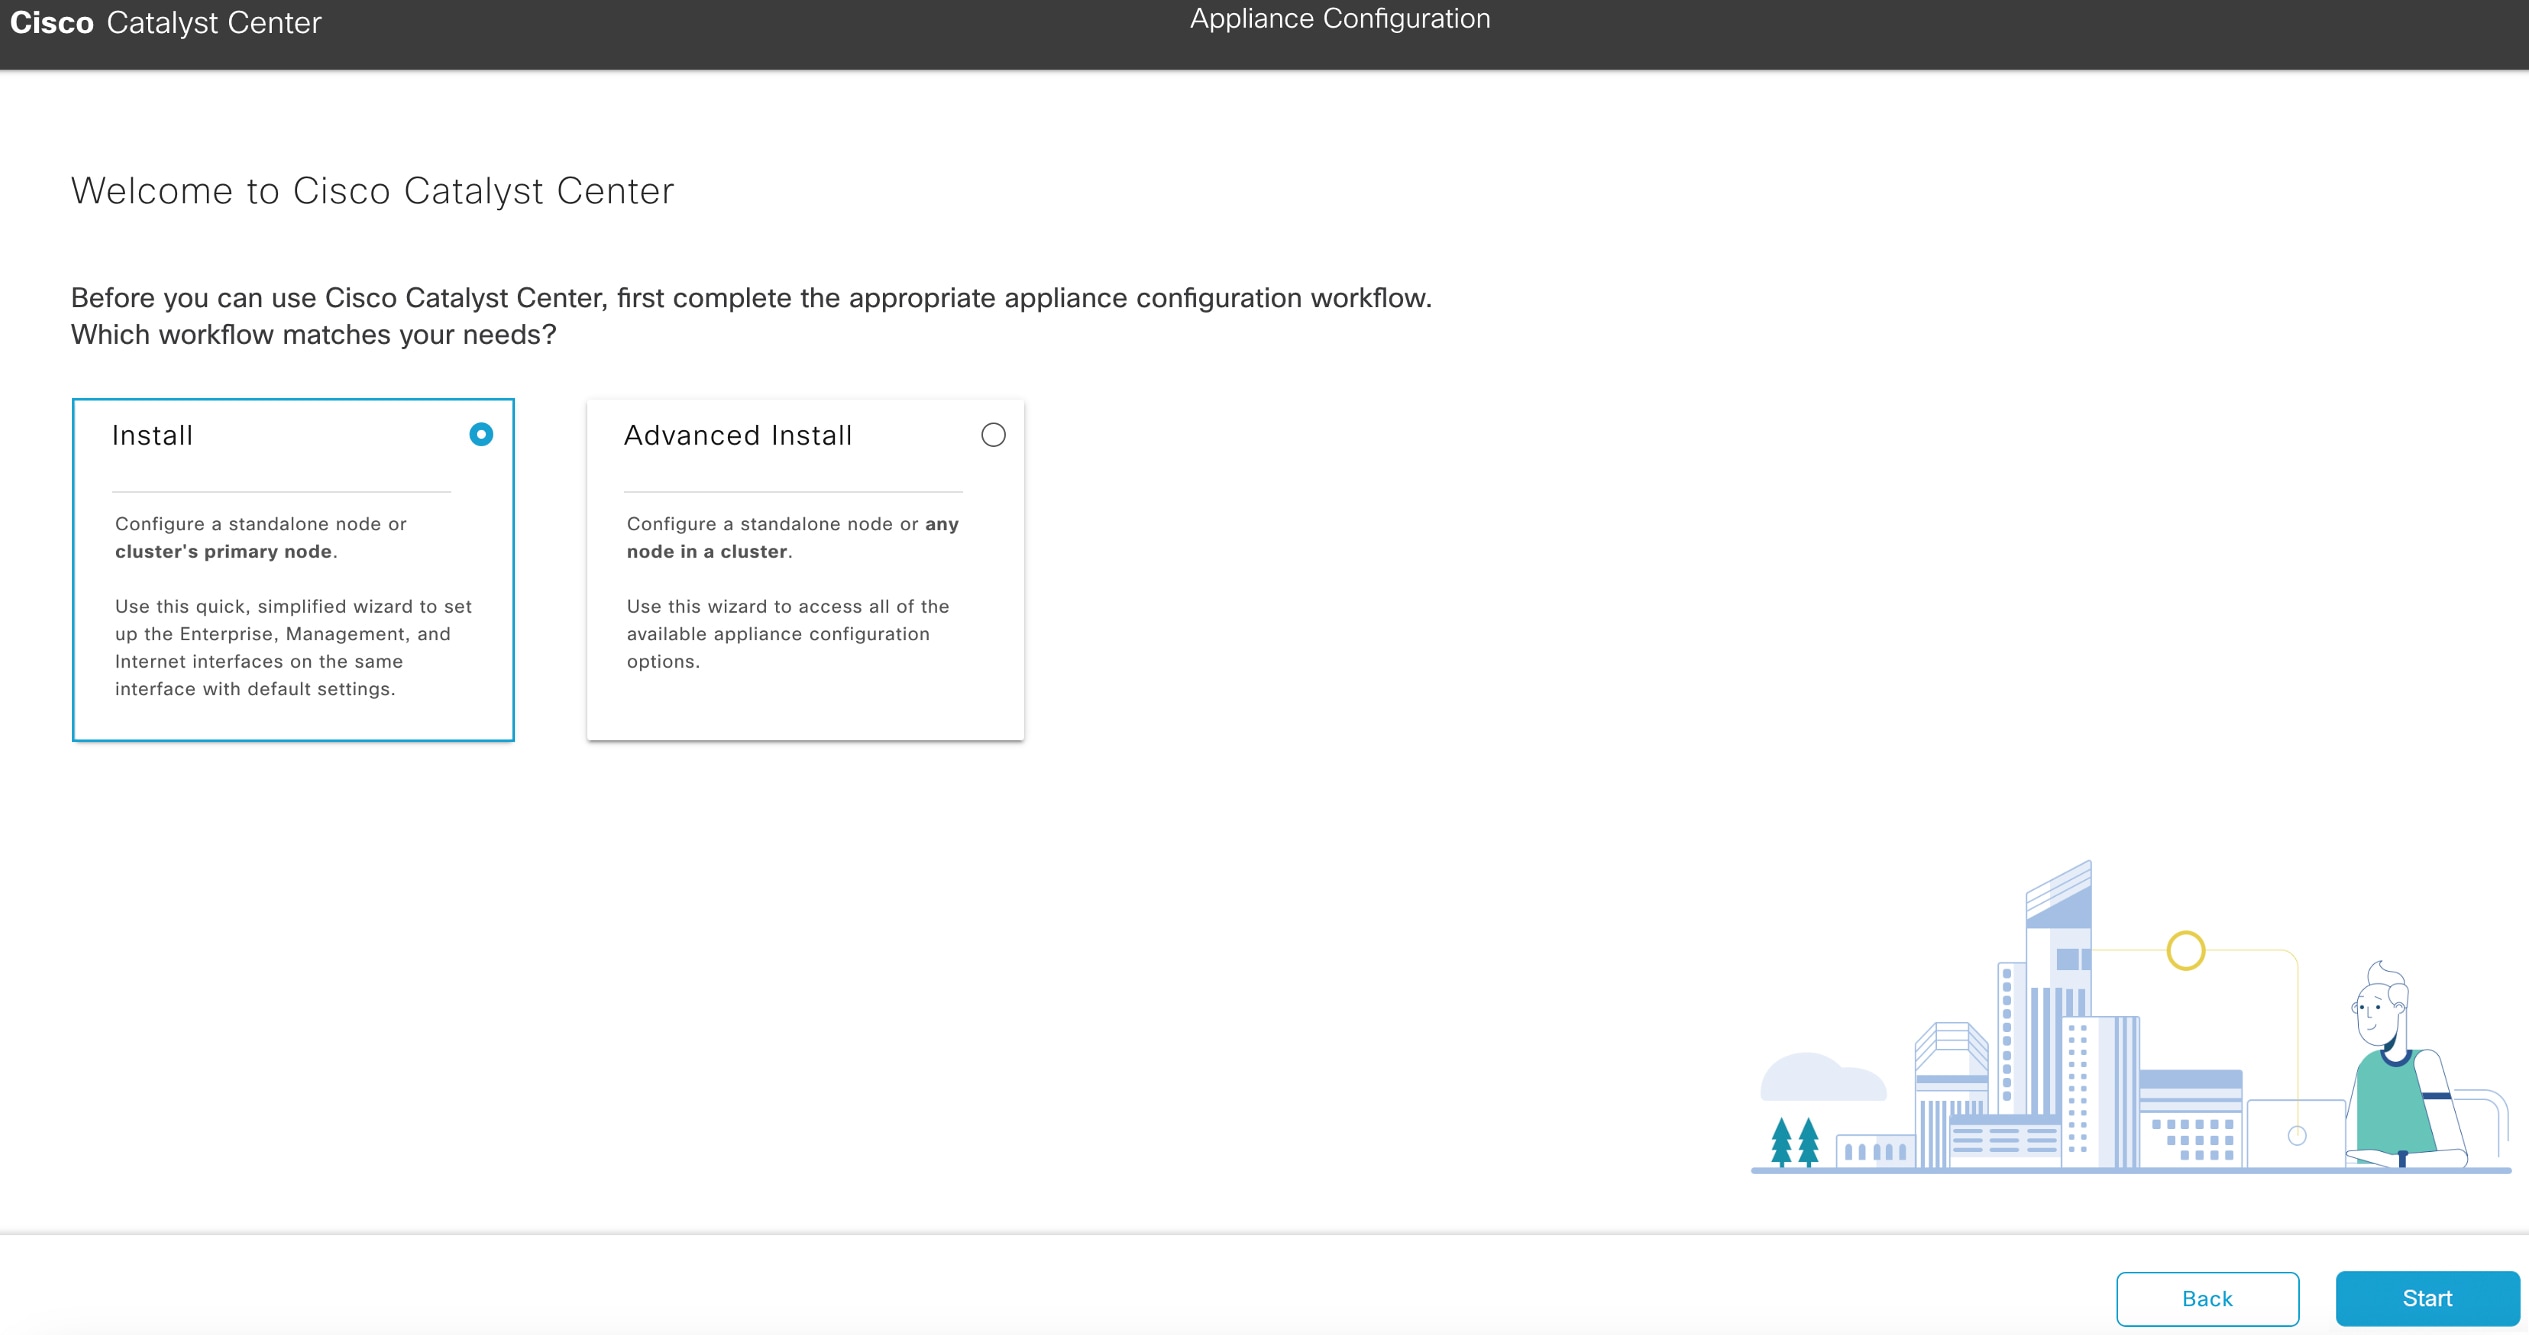 The Appliance Configuration screen displays two appliance configuration workflow options.